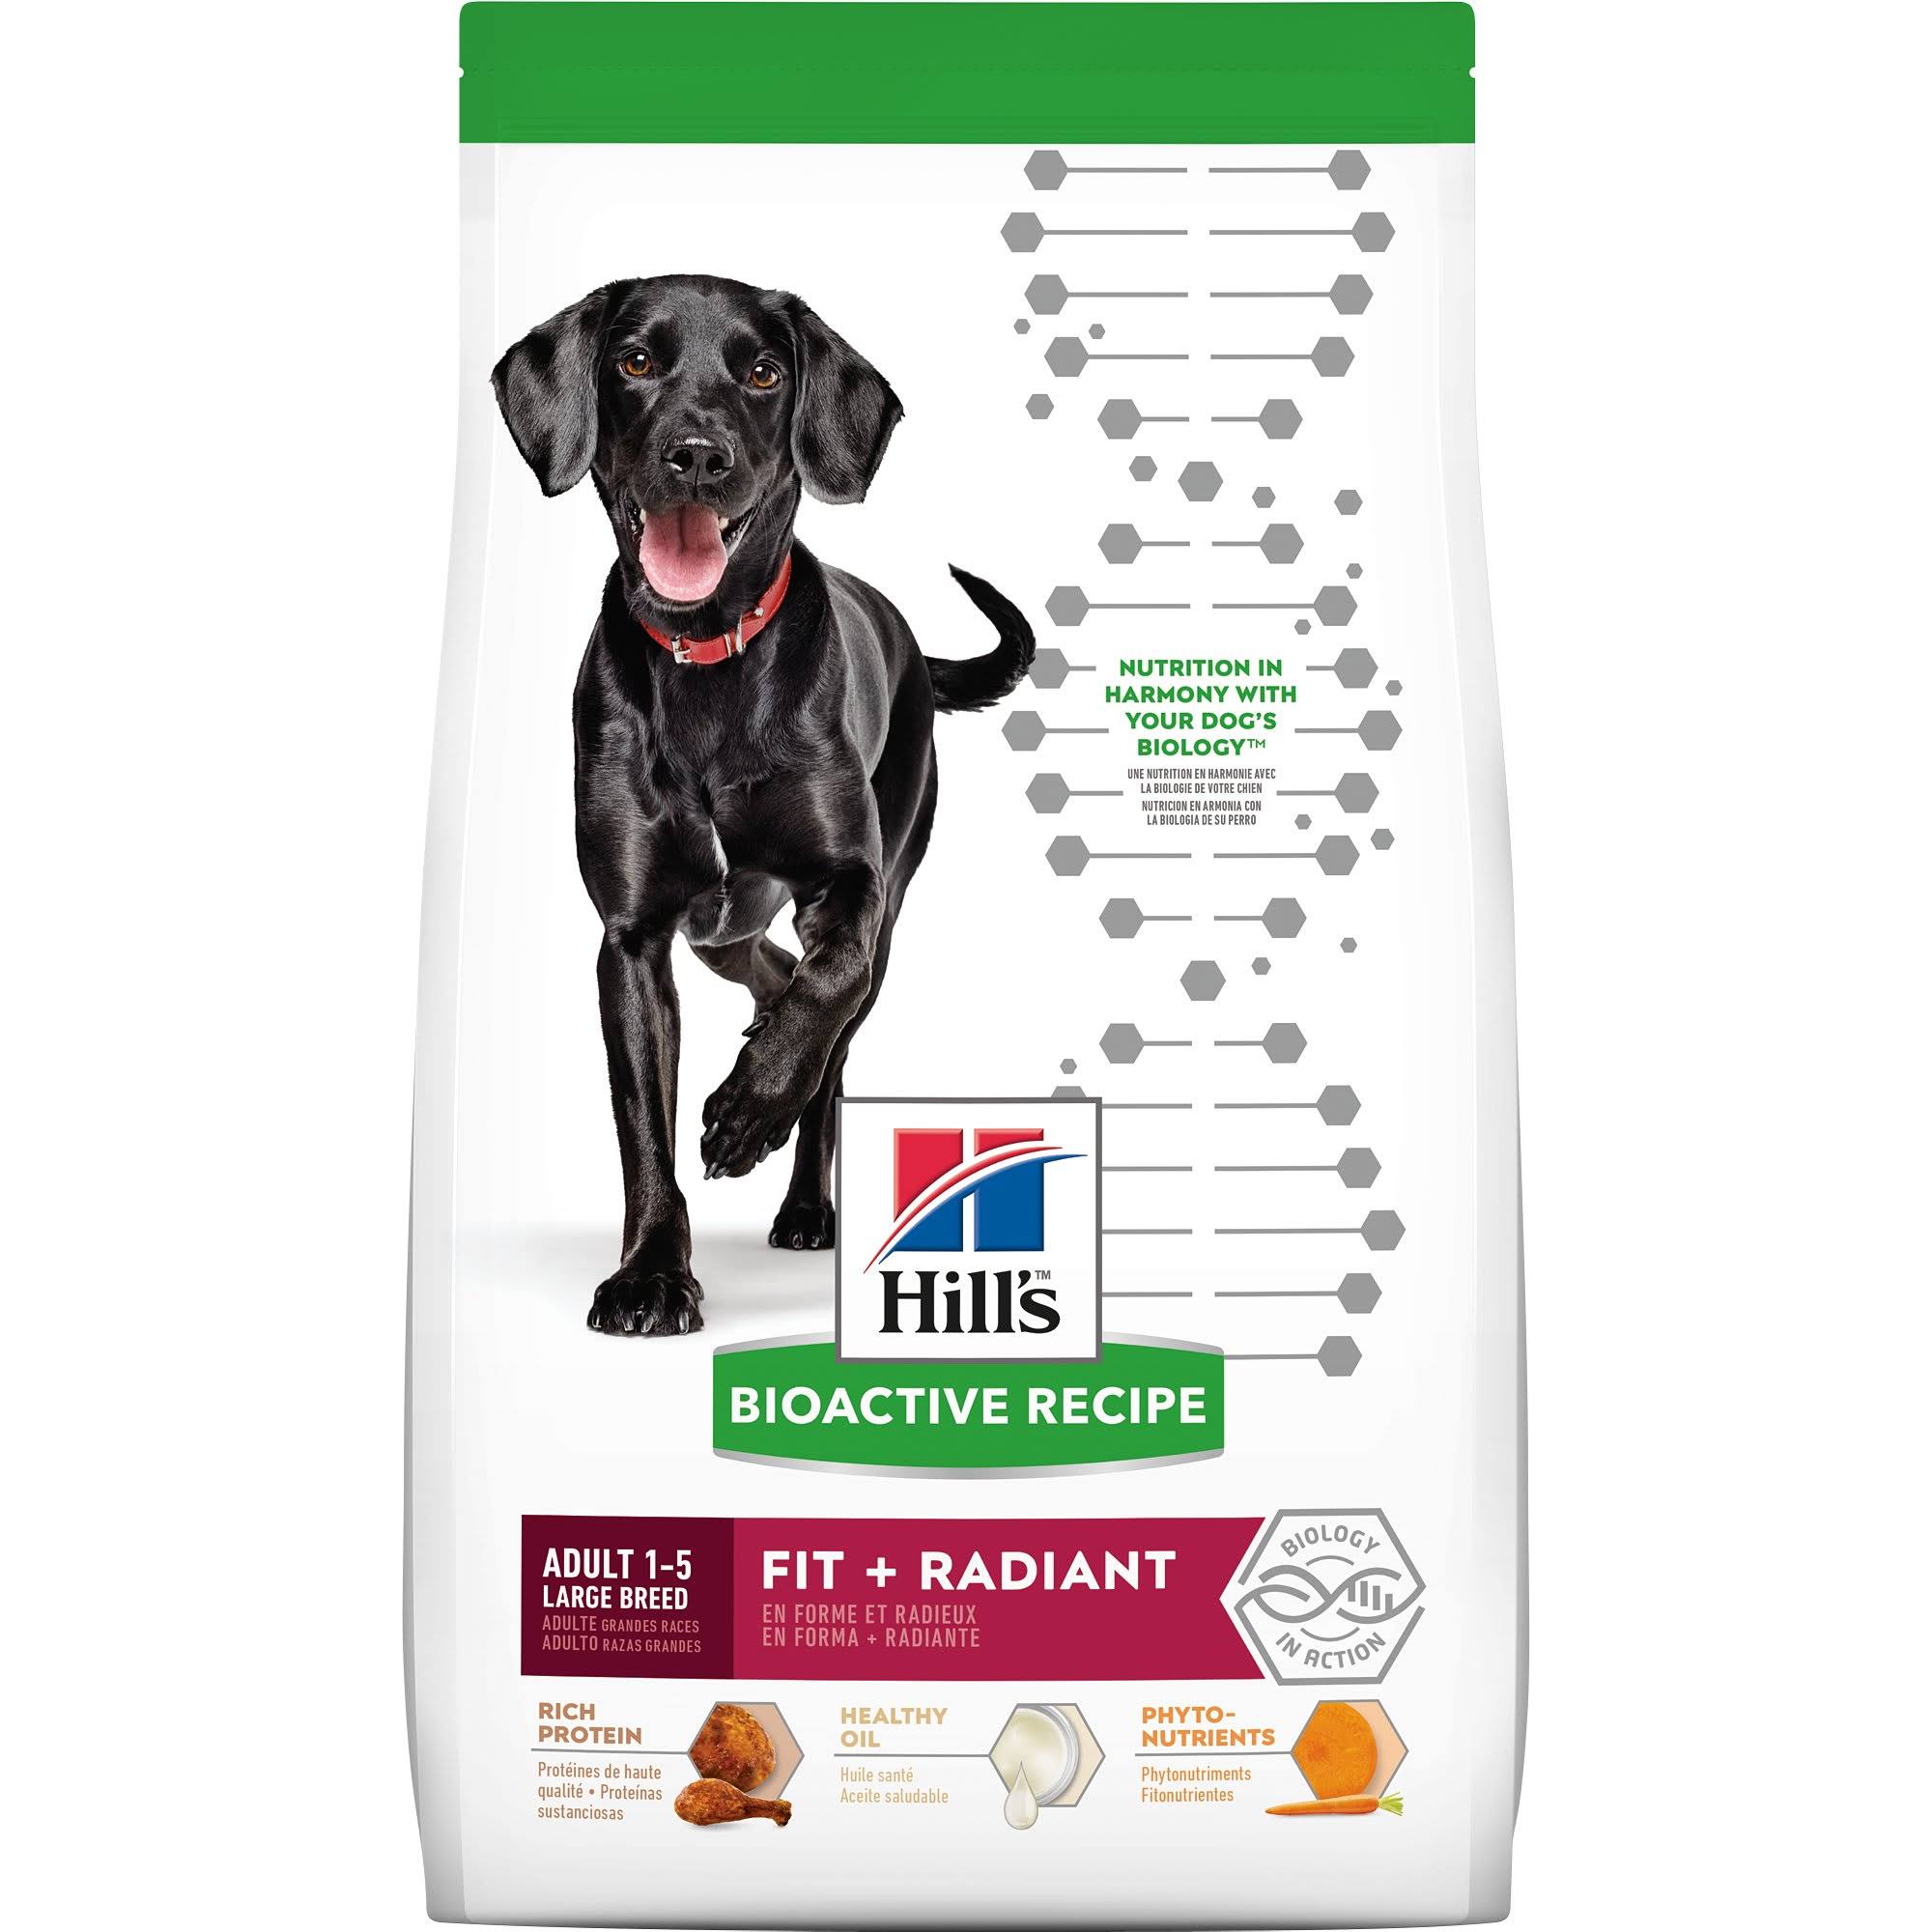 Hill's Bioactive Recipe Fit & Radiant Dog Food - Chicken